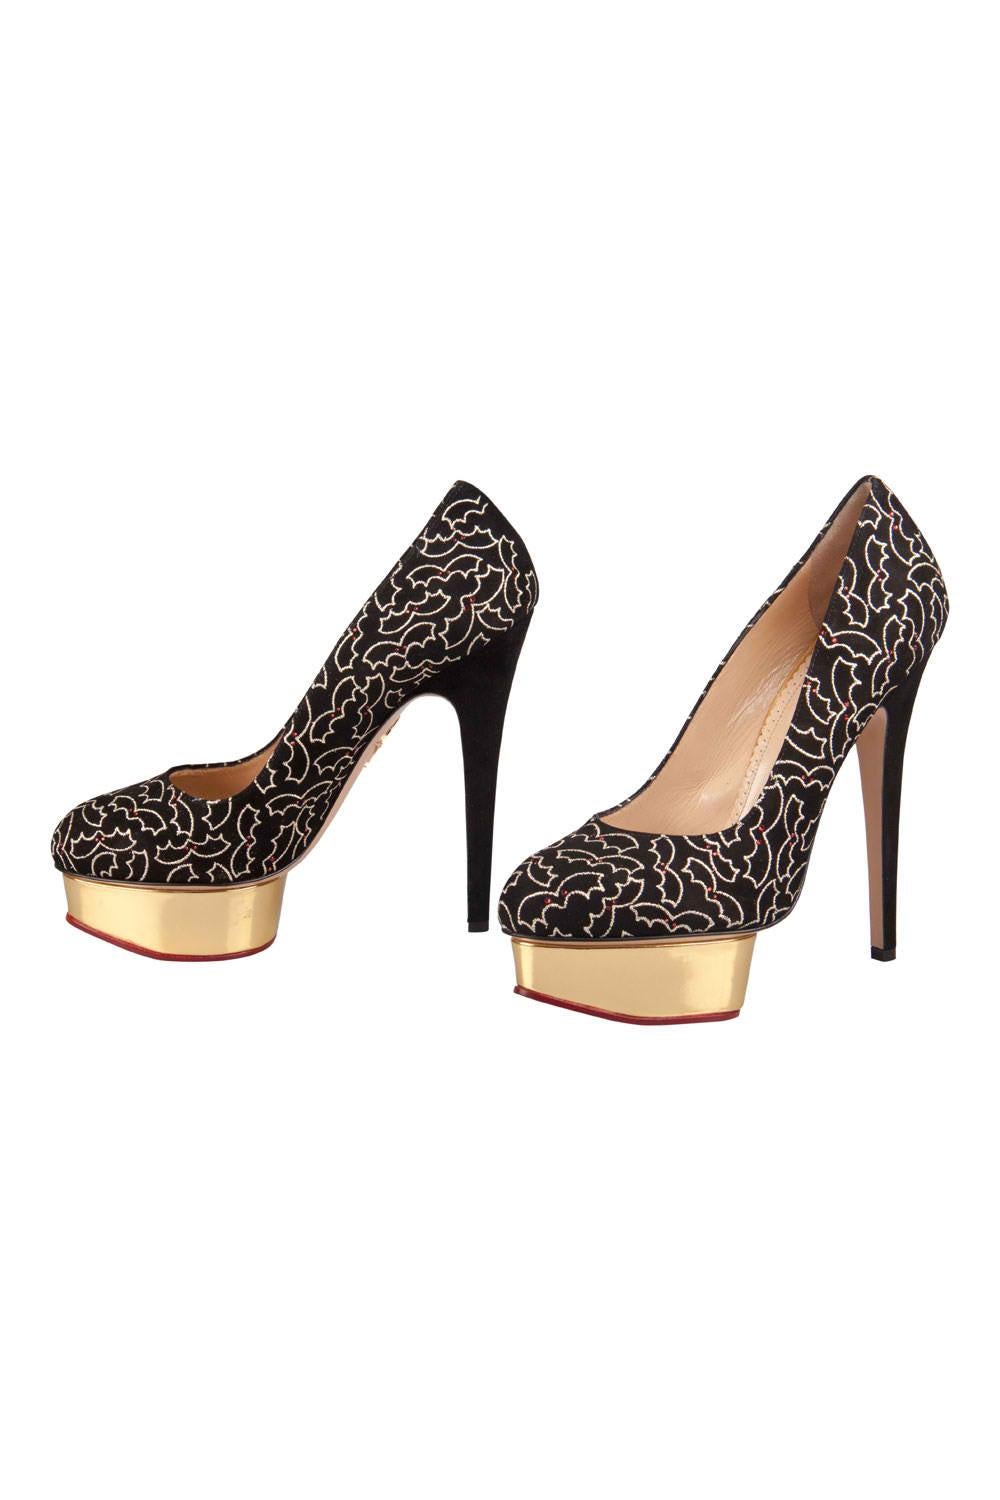 Charlotte Olympia Black Suede Midnight  Embroidered Platform Pumps Size 39 2